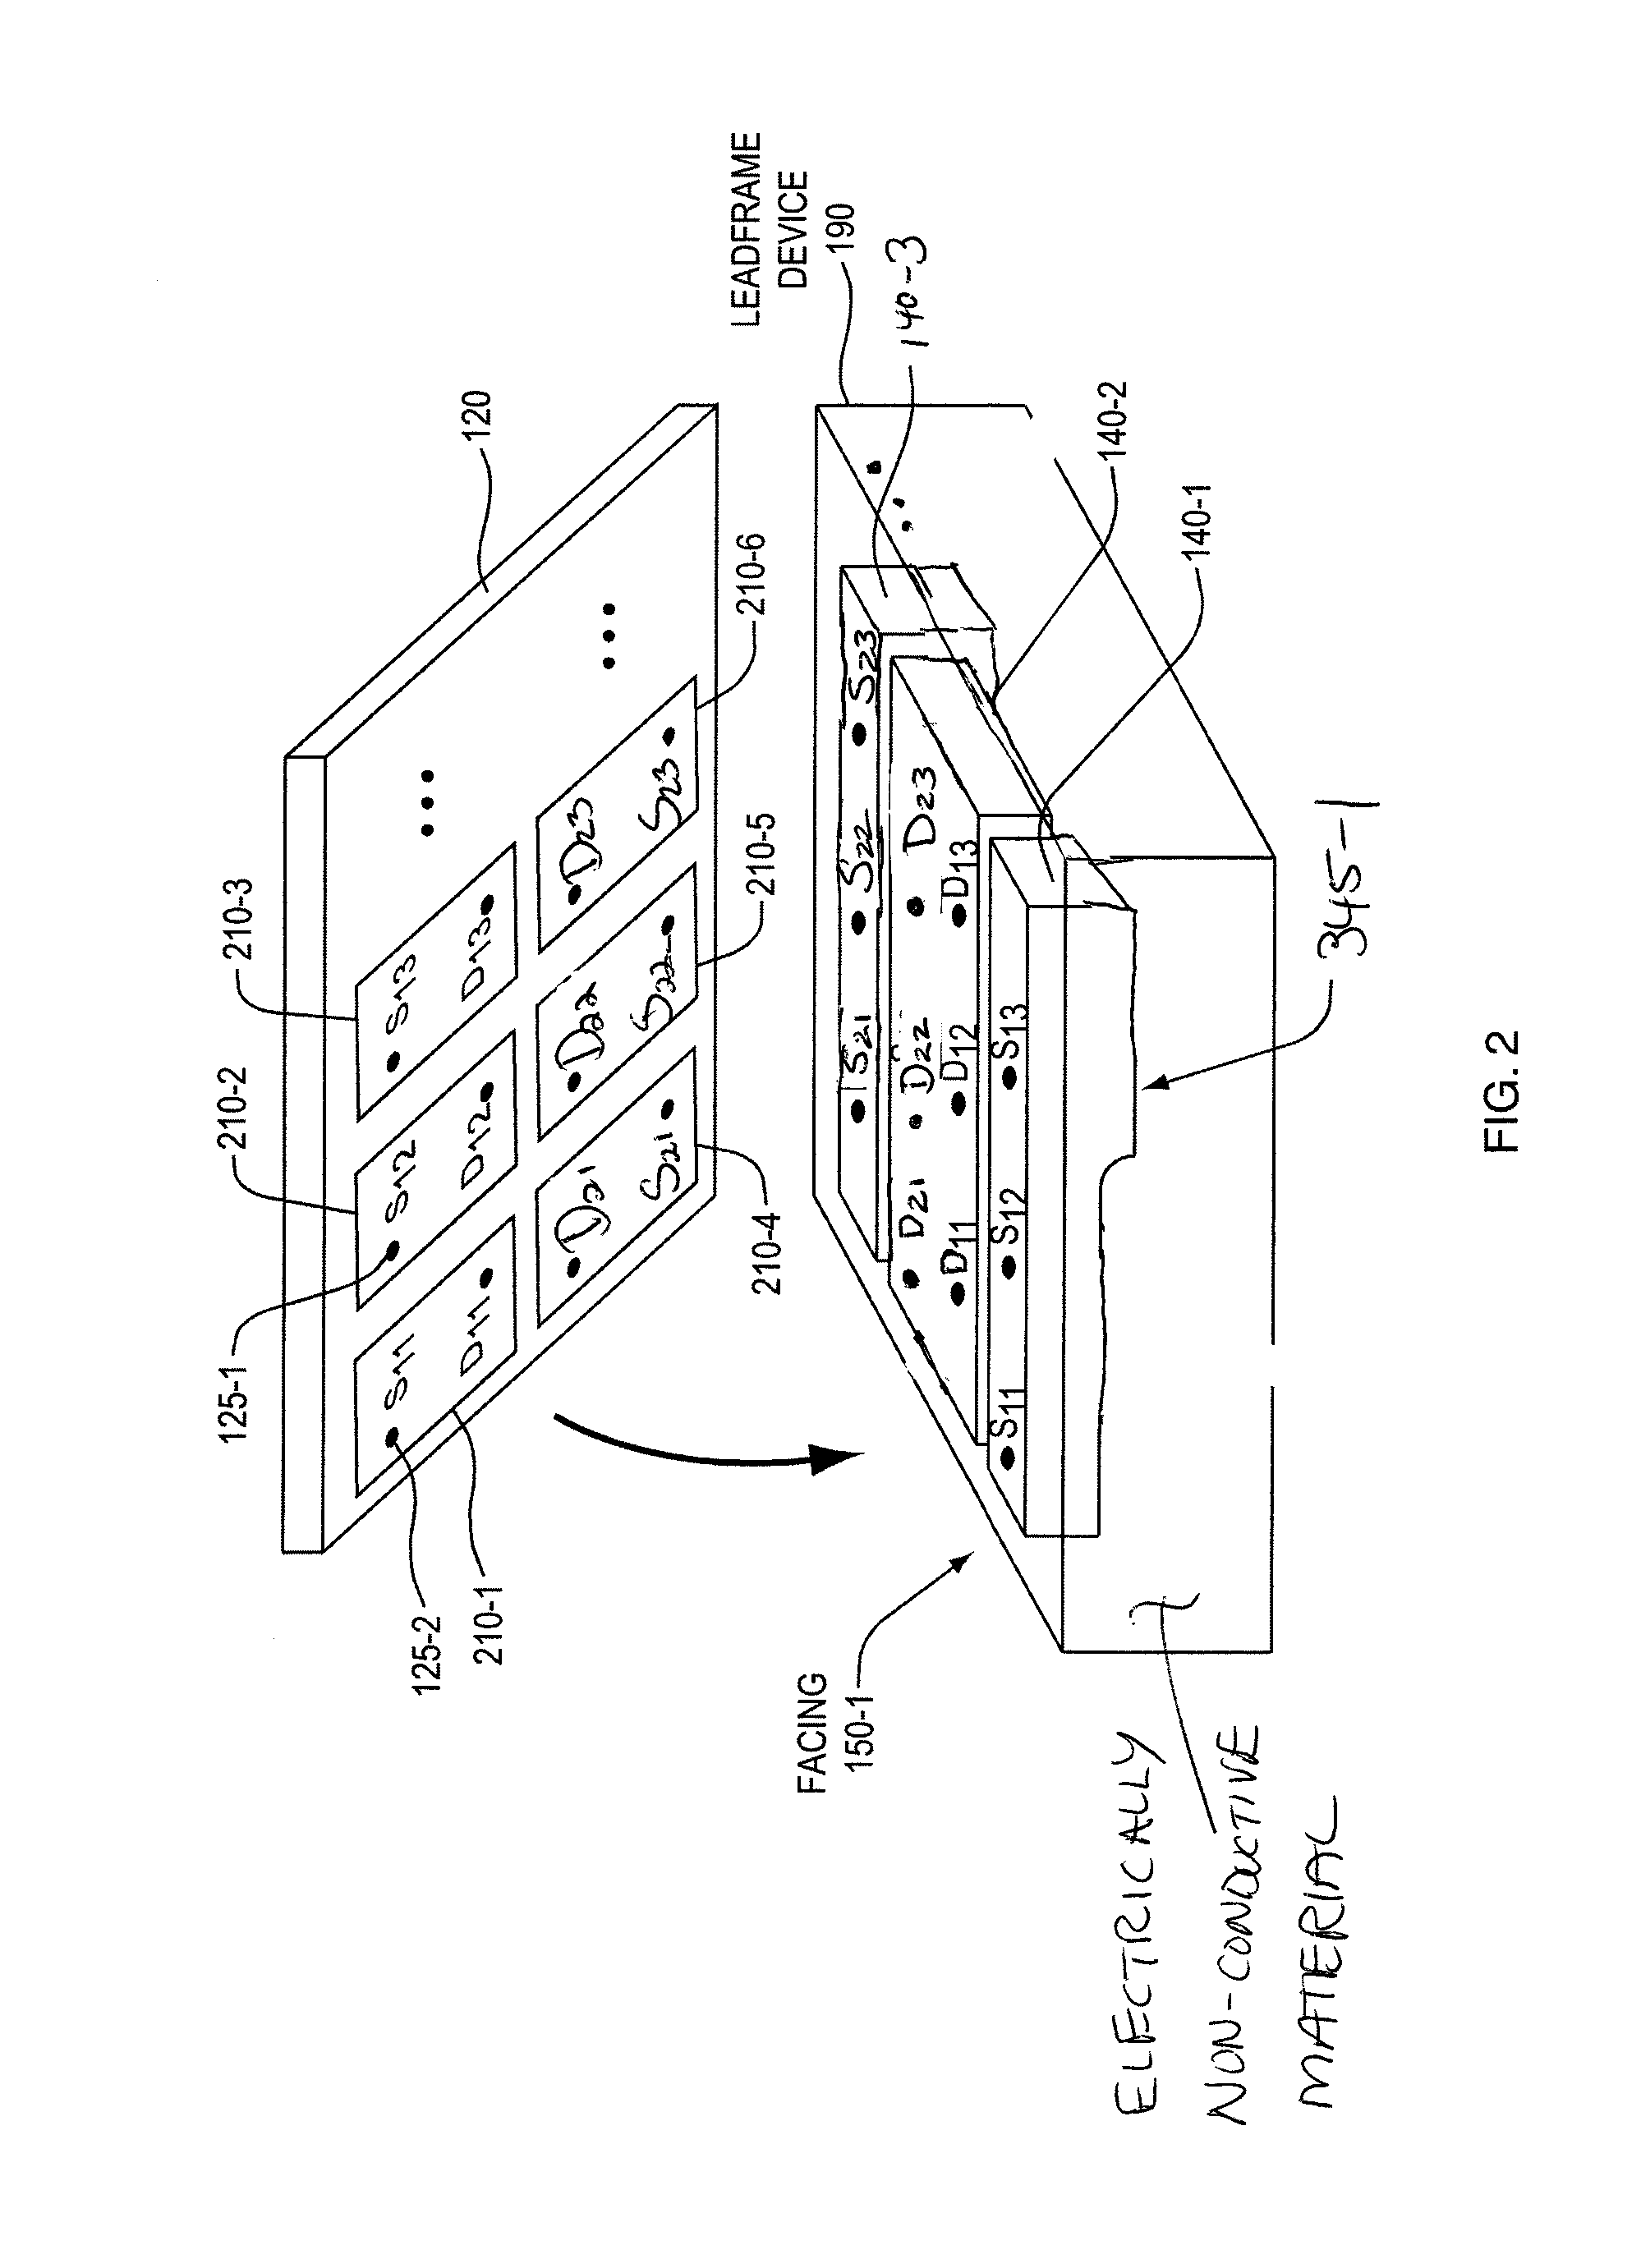 Electrical connectivity for circuit applications